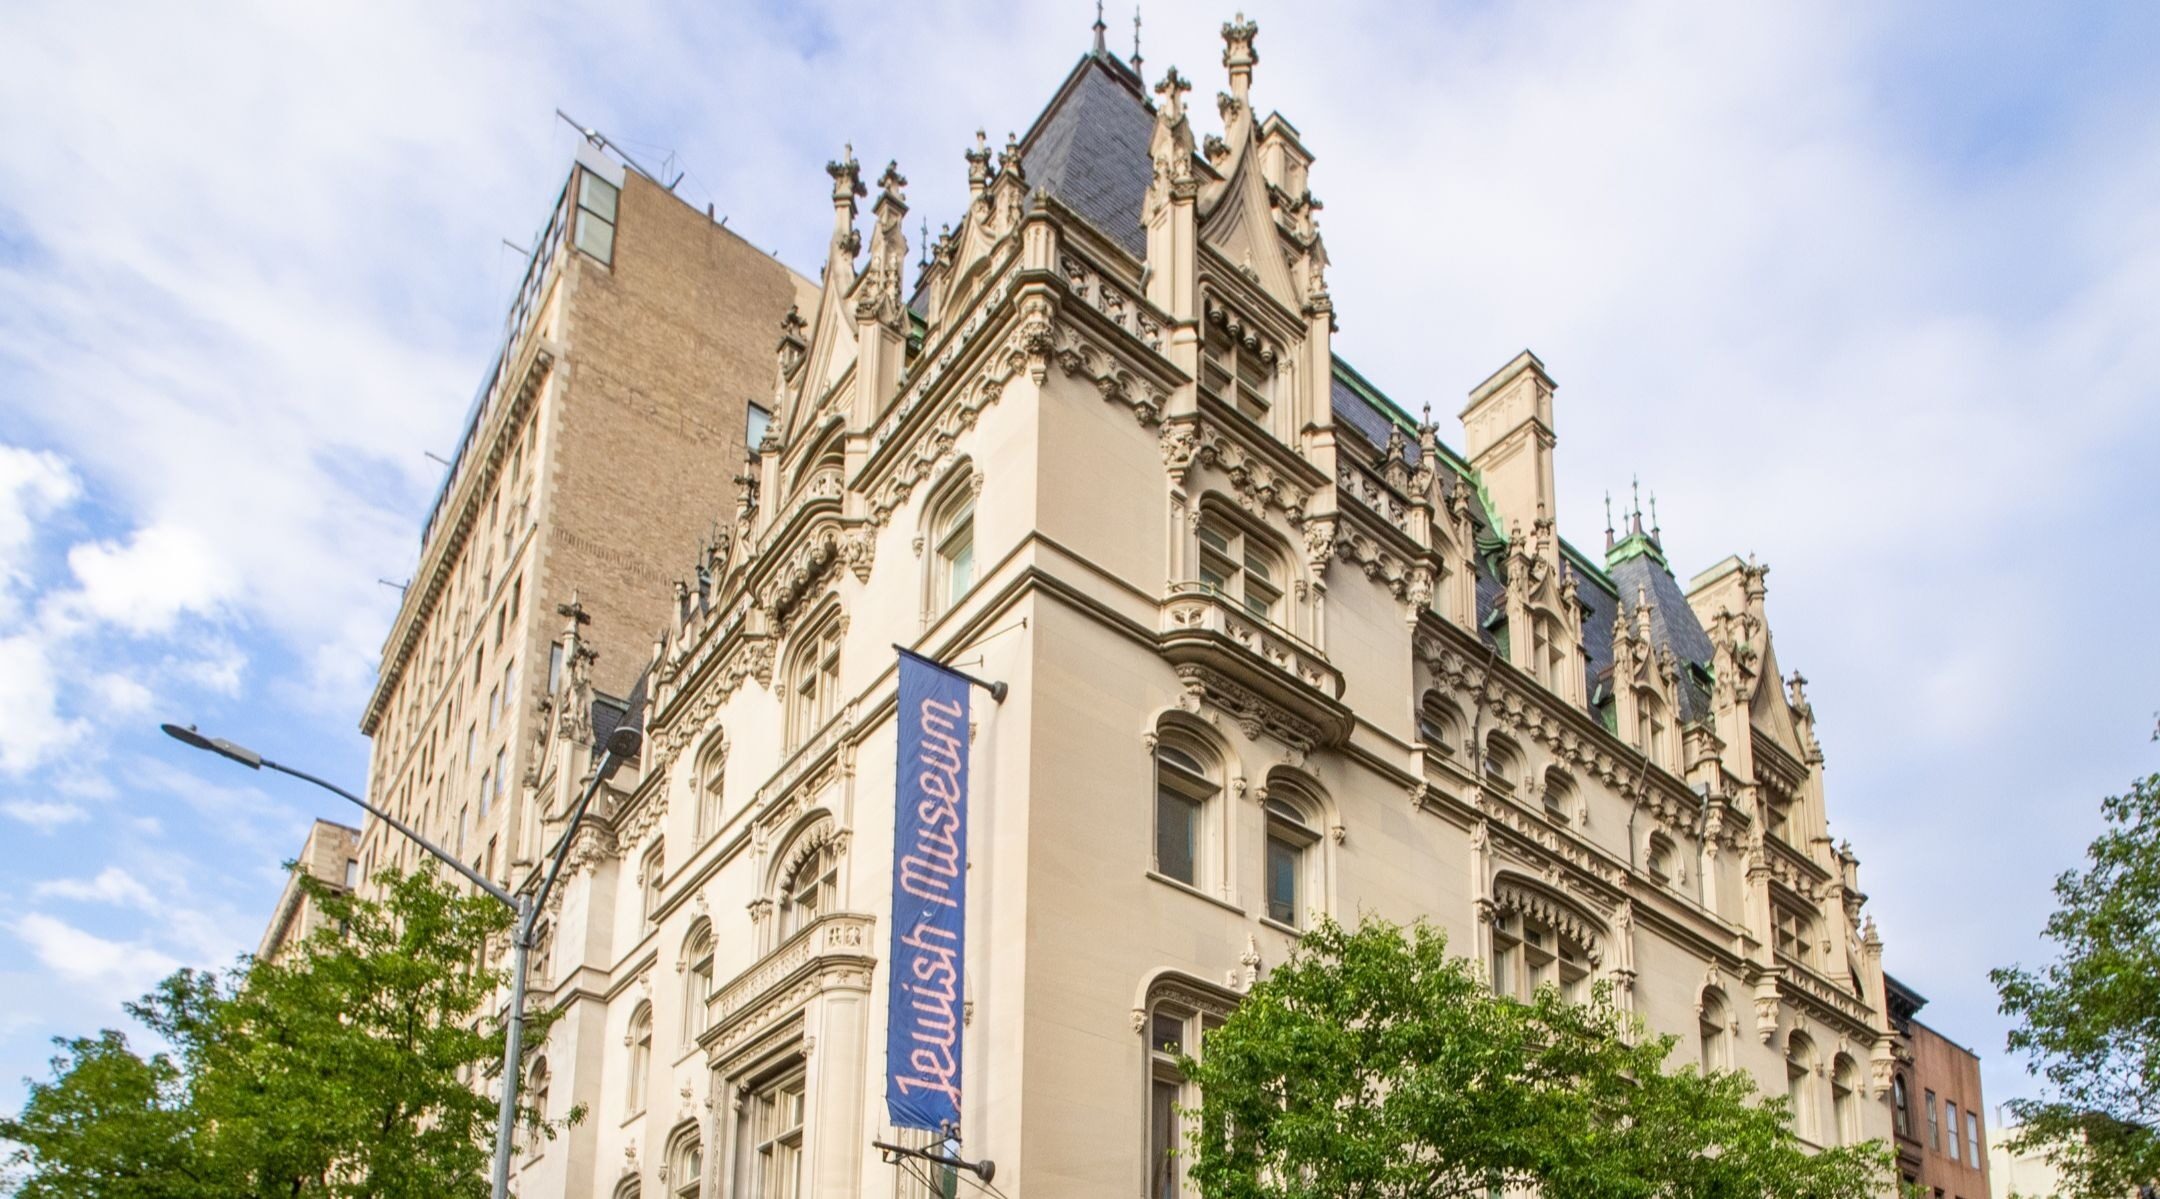 NYC’s Jewish Museum to reopen following 6-month closure due to